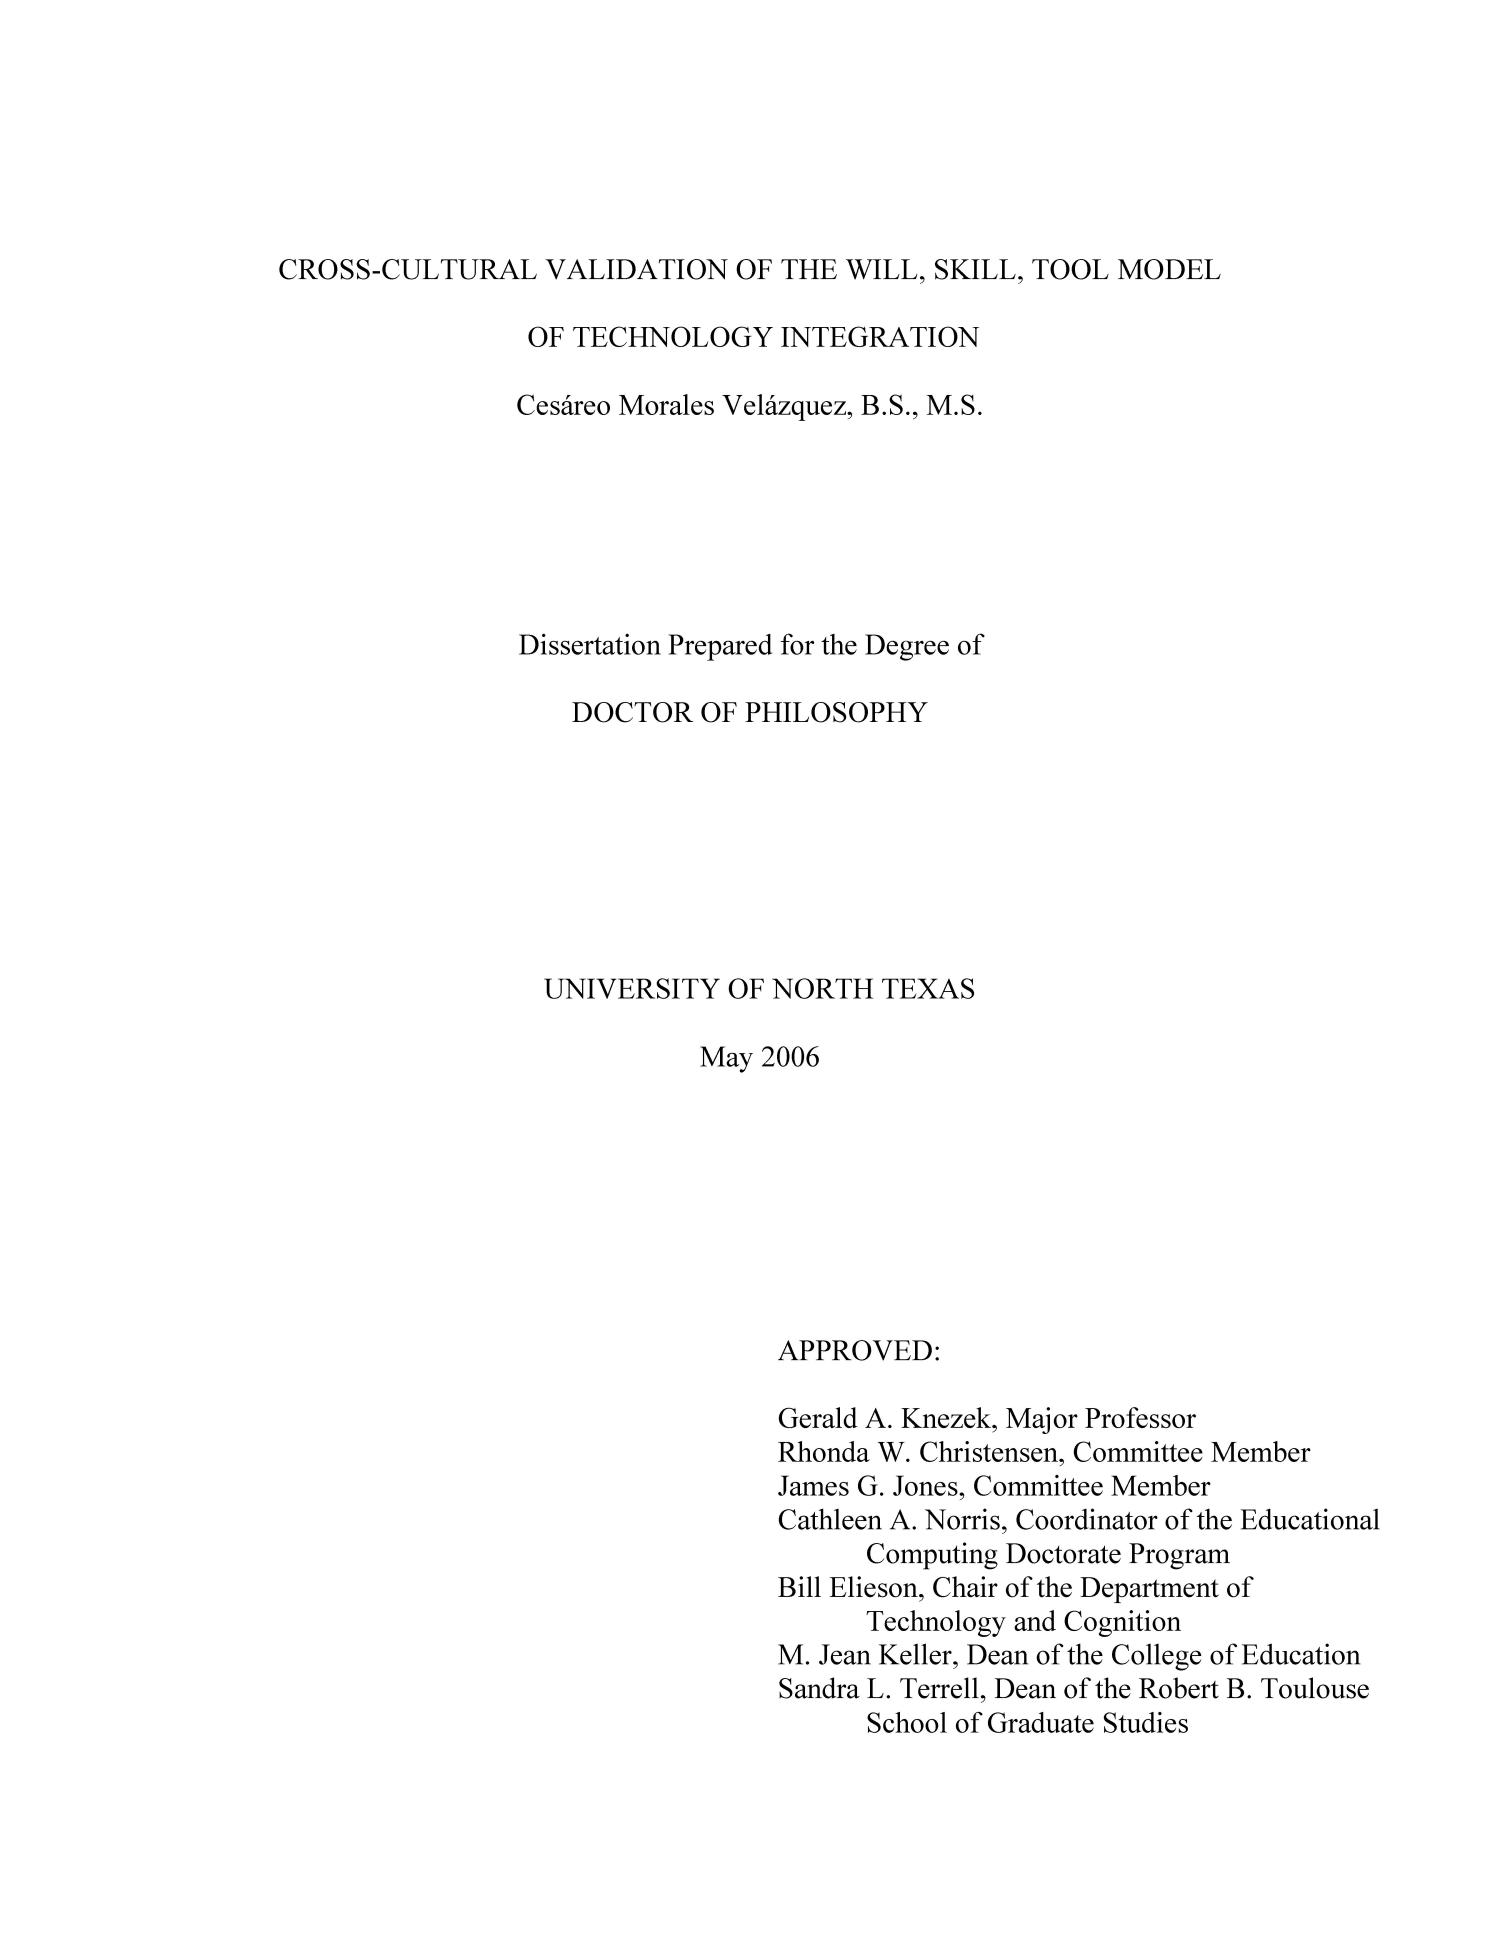 Cross-Cultural Validation of the Will, Skill, Tool Model of Technology Integration
                                                
                                                    Title Page
                                                